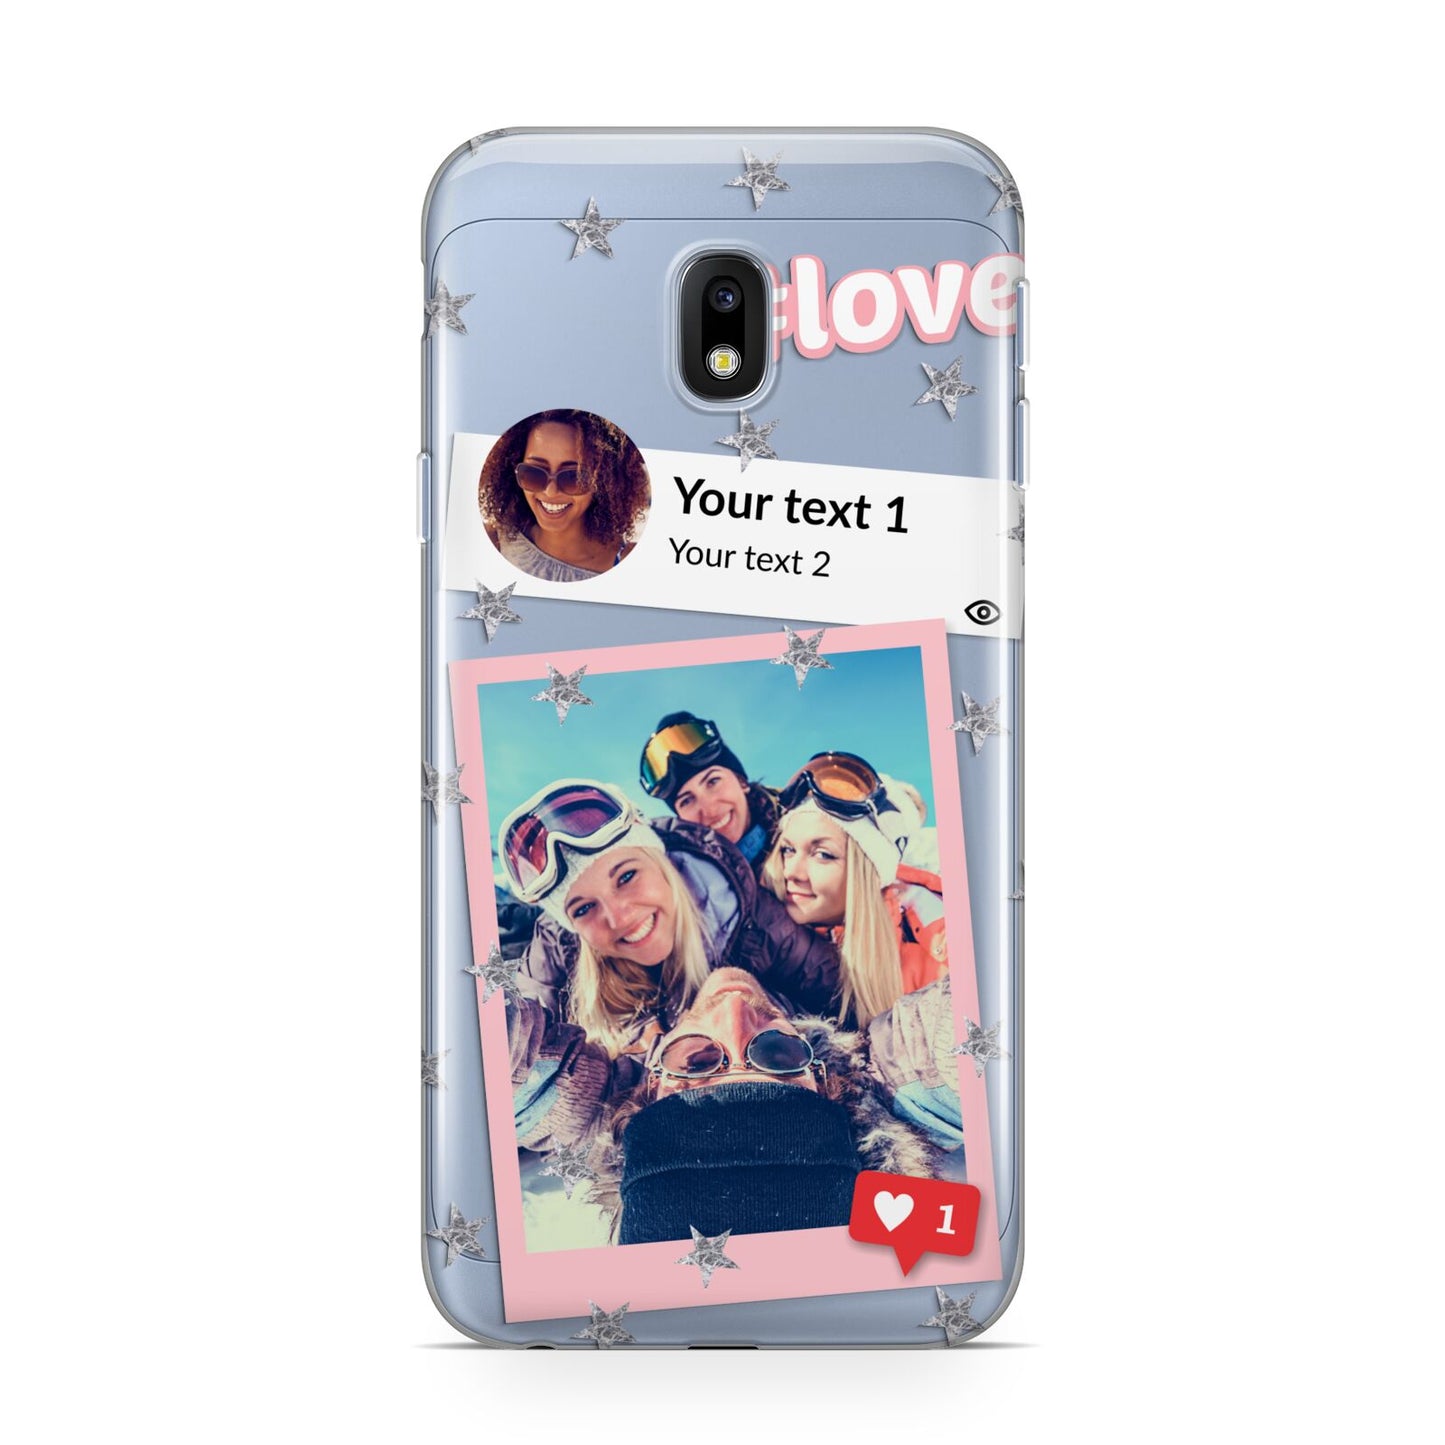 Starry Social Media Photo Montage Upload with Text Samsung Galaxy J3 2017 Case